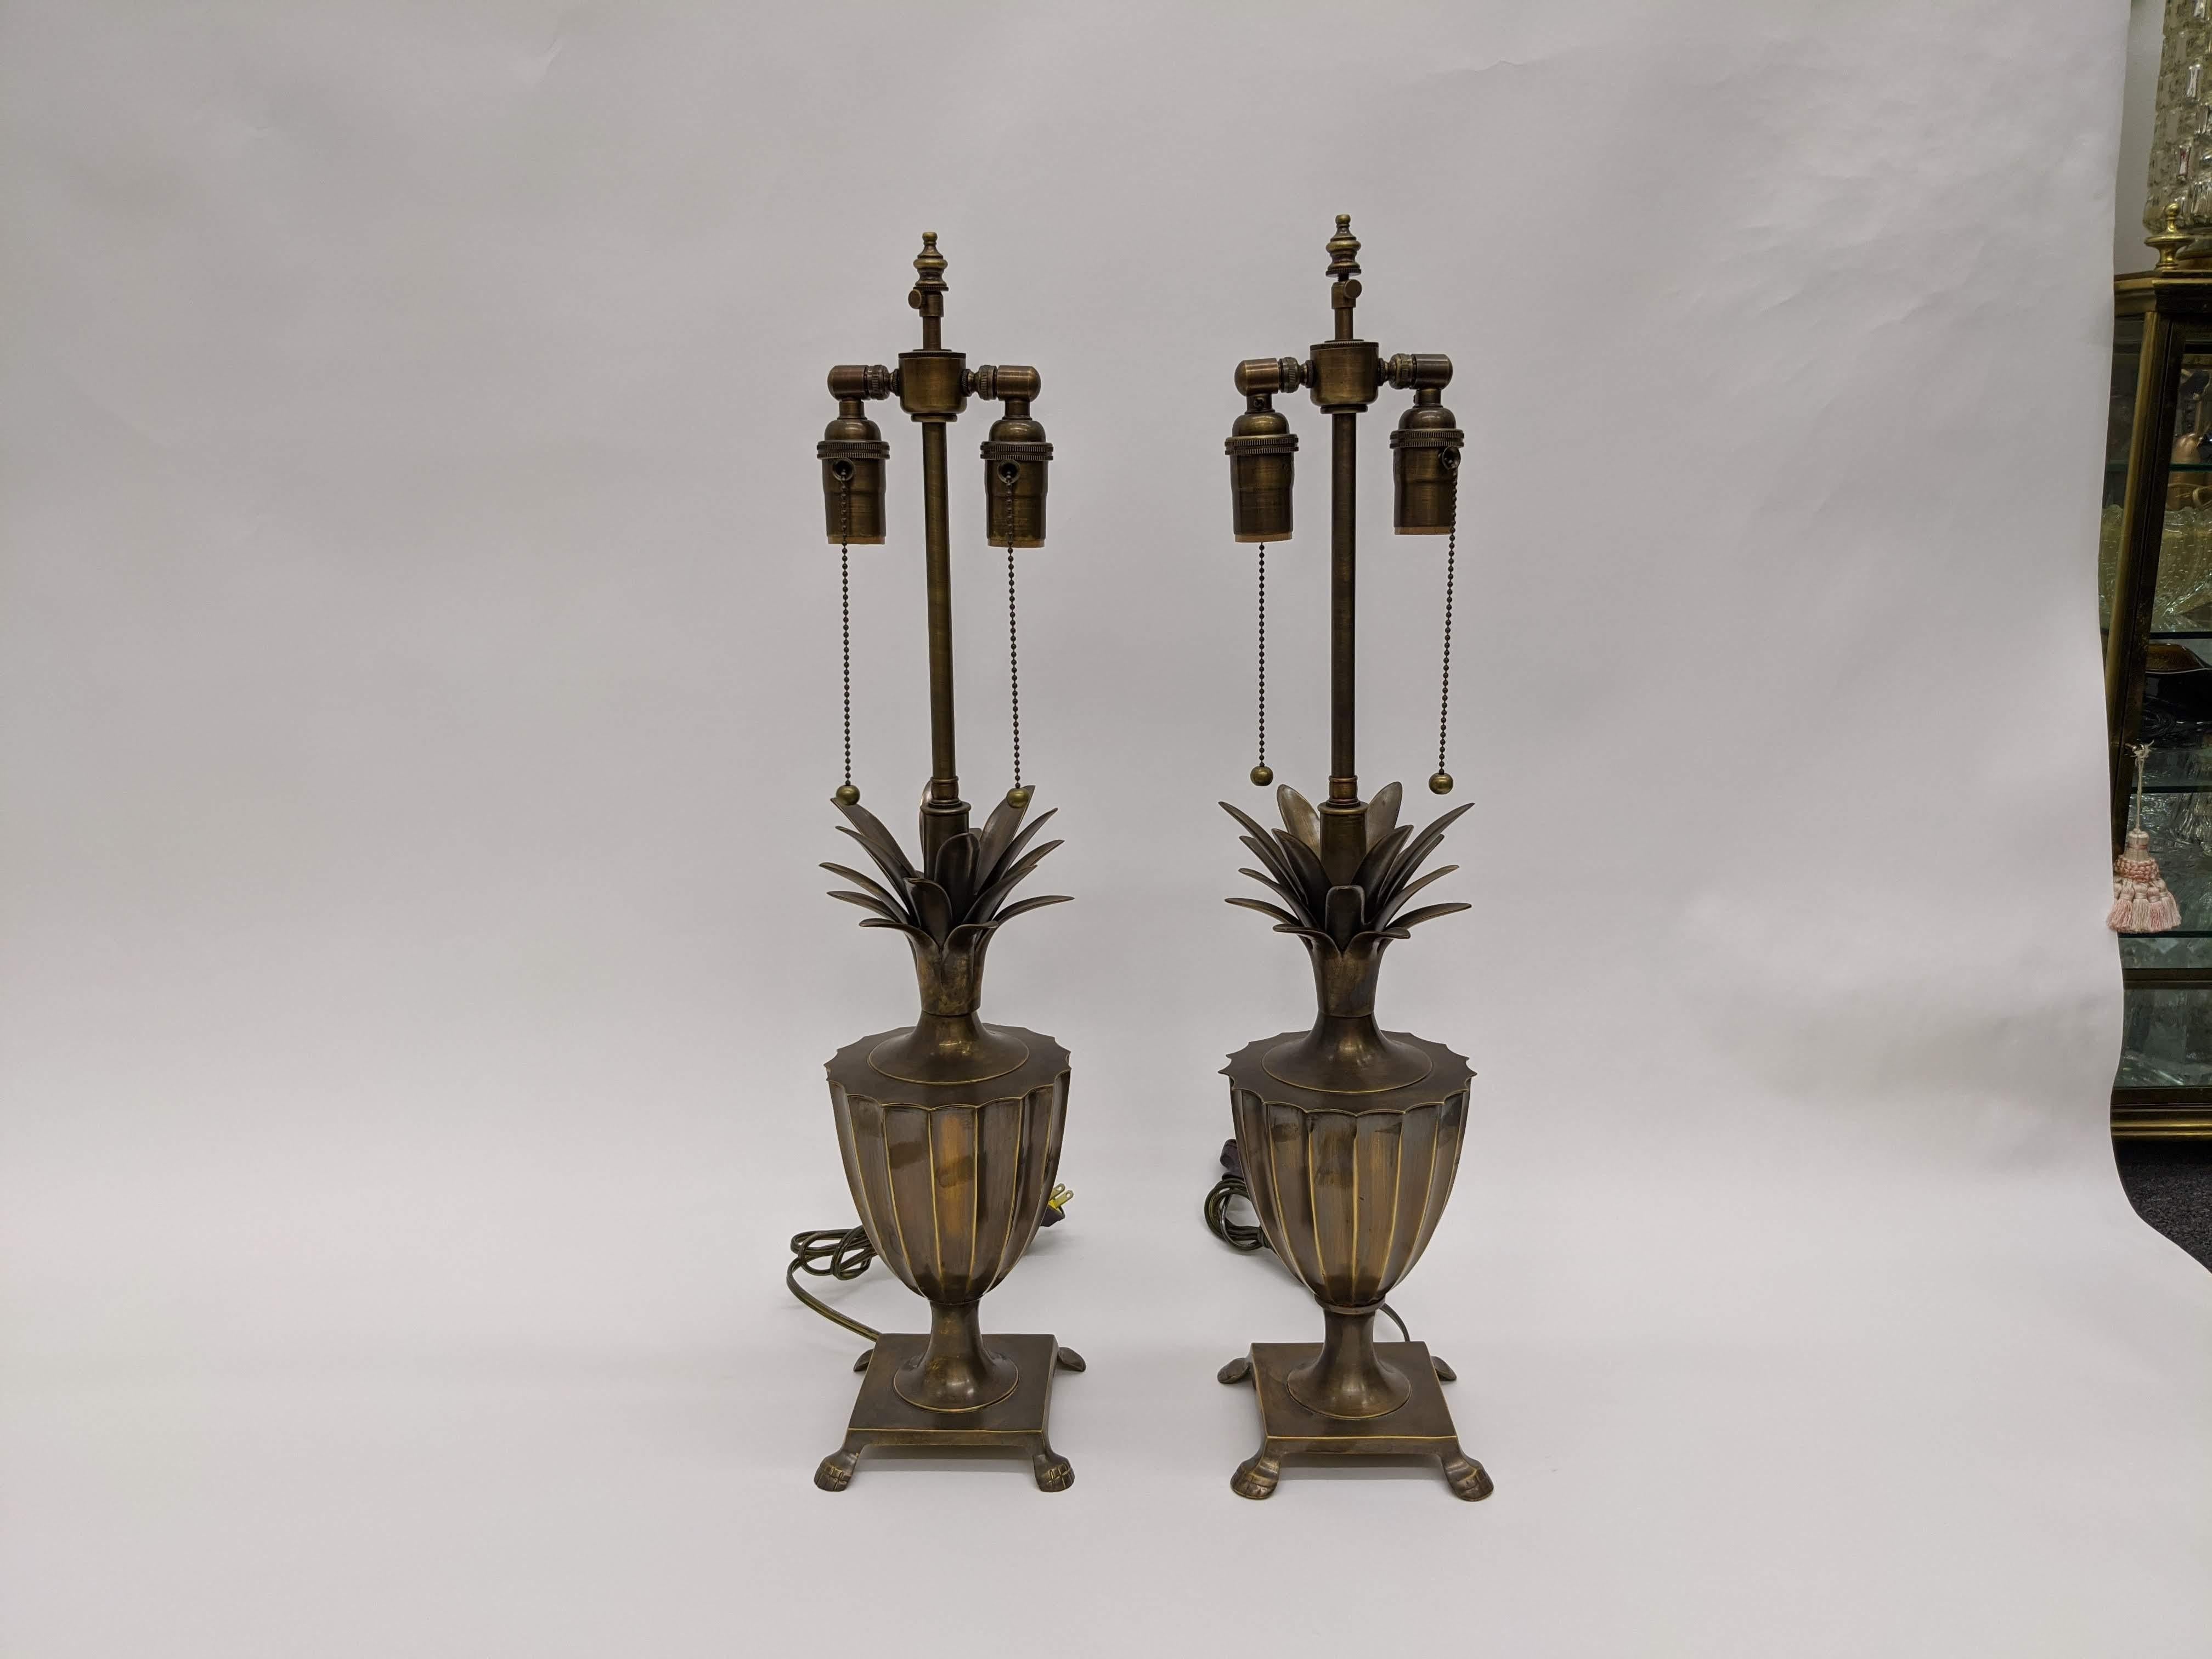 Midcentury patinated solid brass fluted pineapple urn lamps with square platform footed base. Double socketed brass hardware with pull chains.